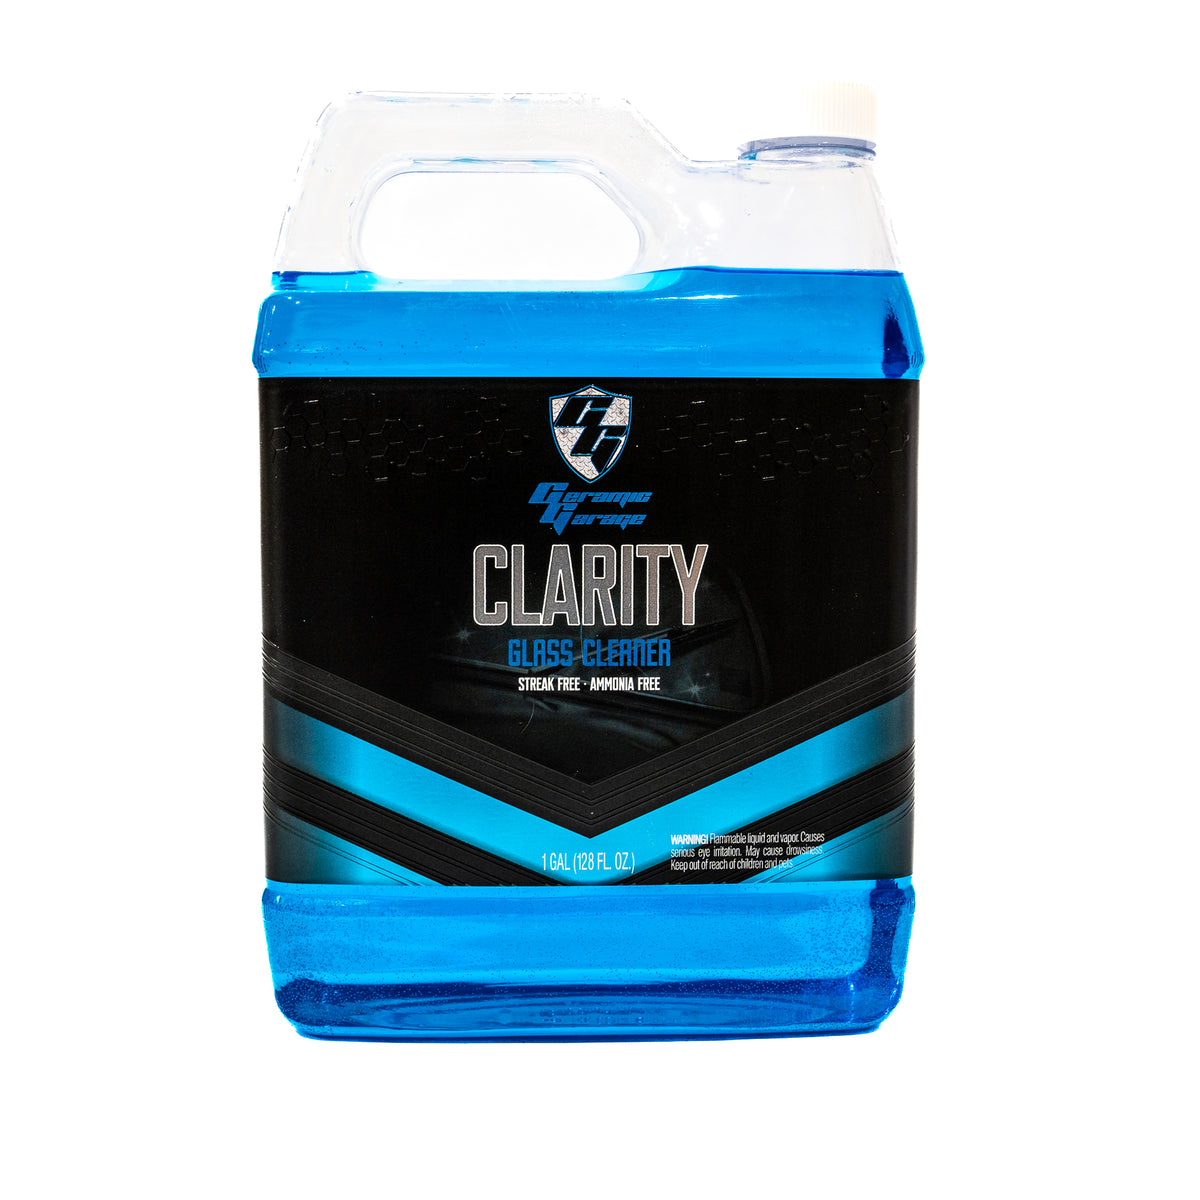 Clarity Glass Cleaner Ammonia Free and Streak Free Glass Cleaner 16oz